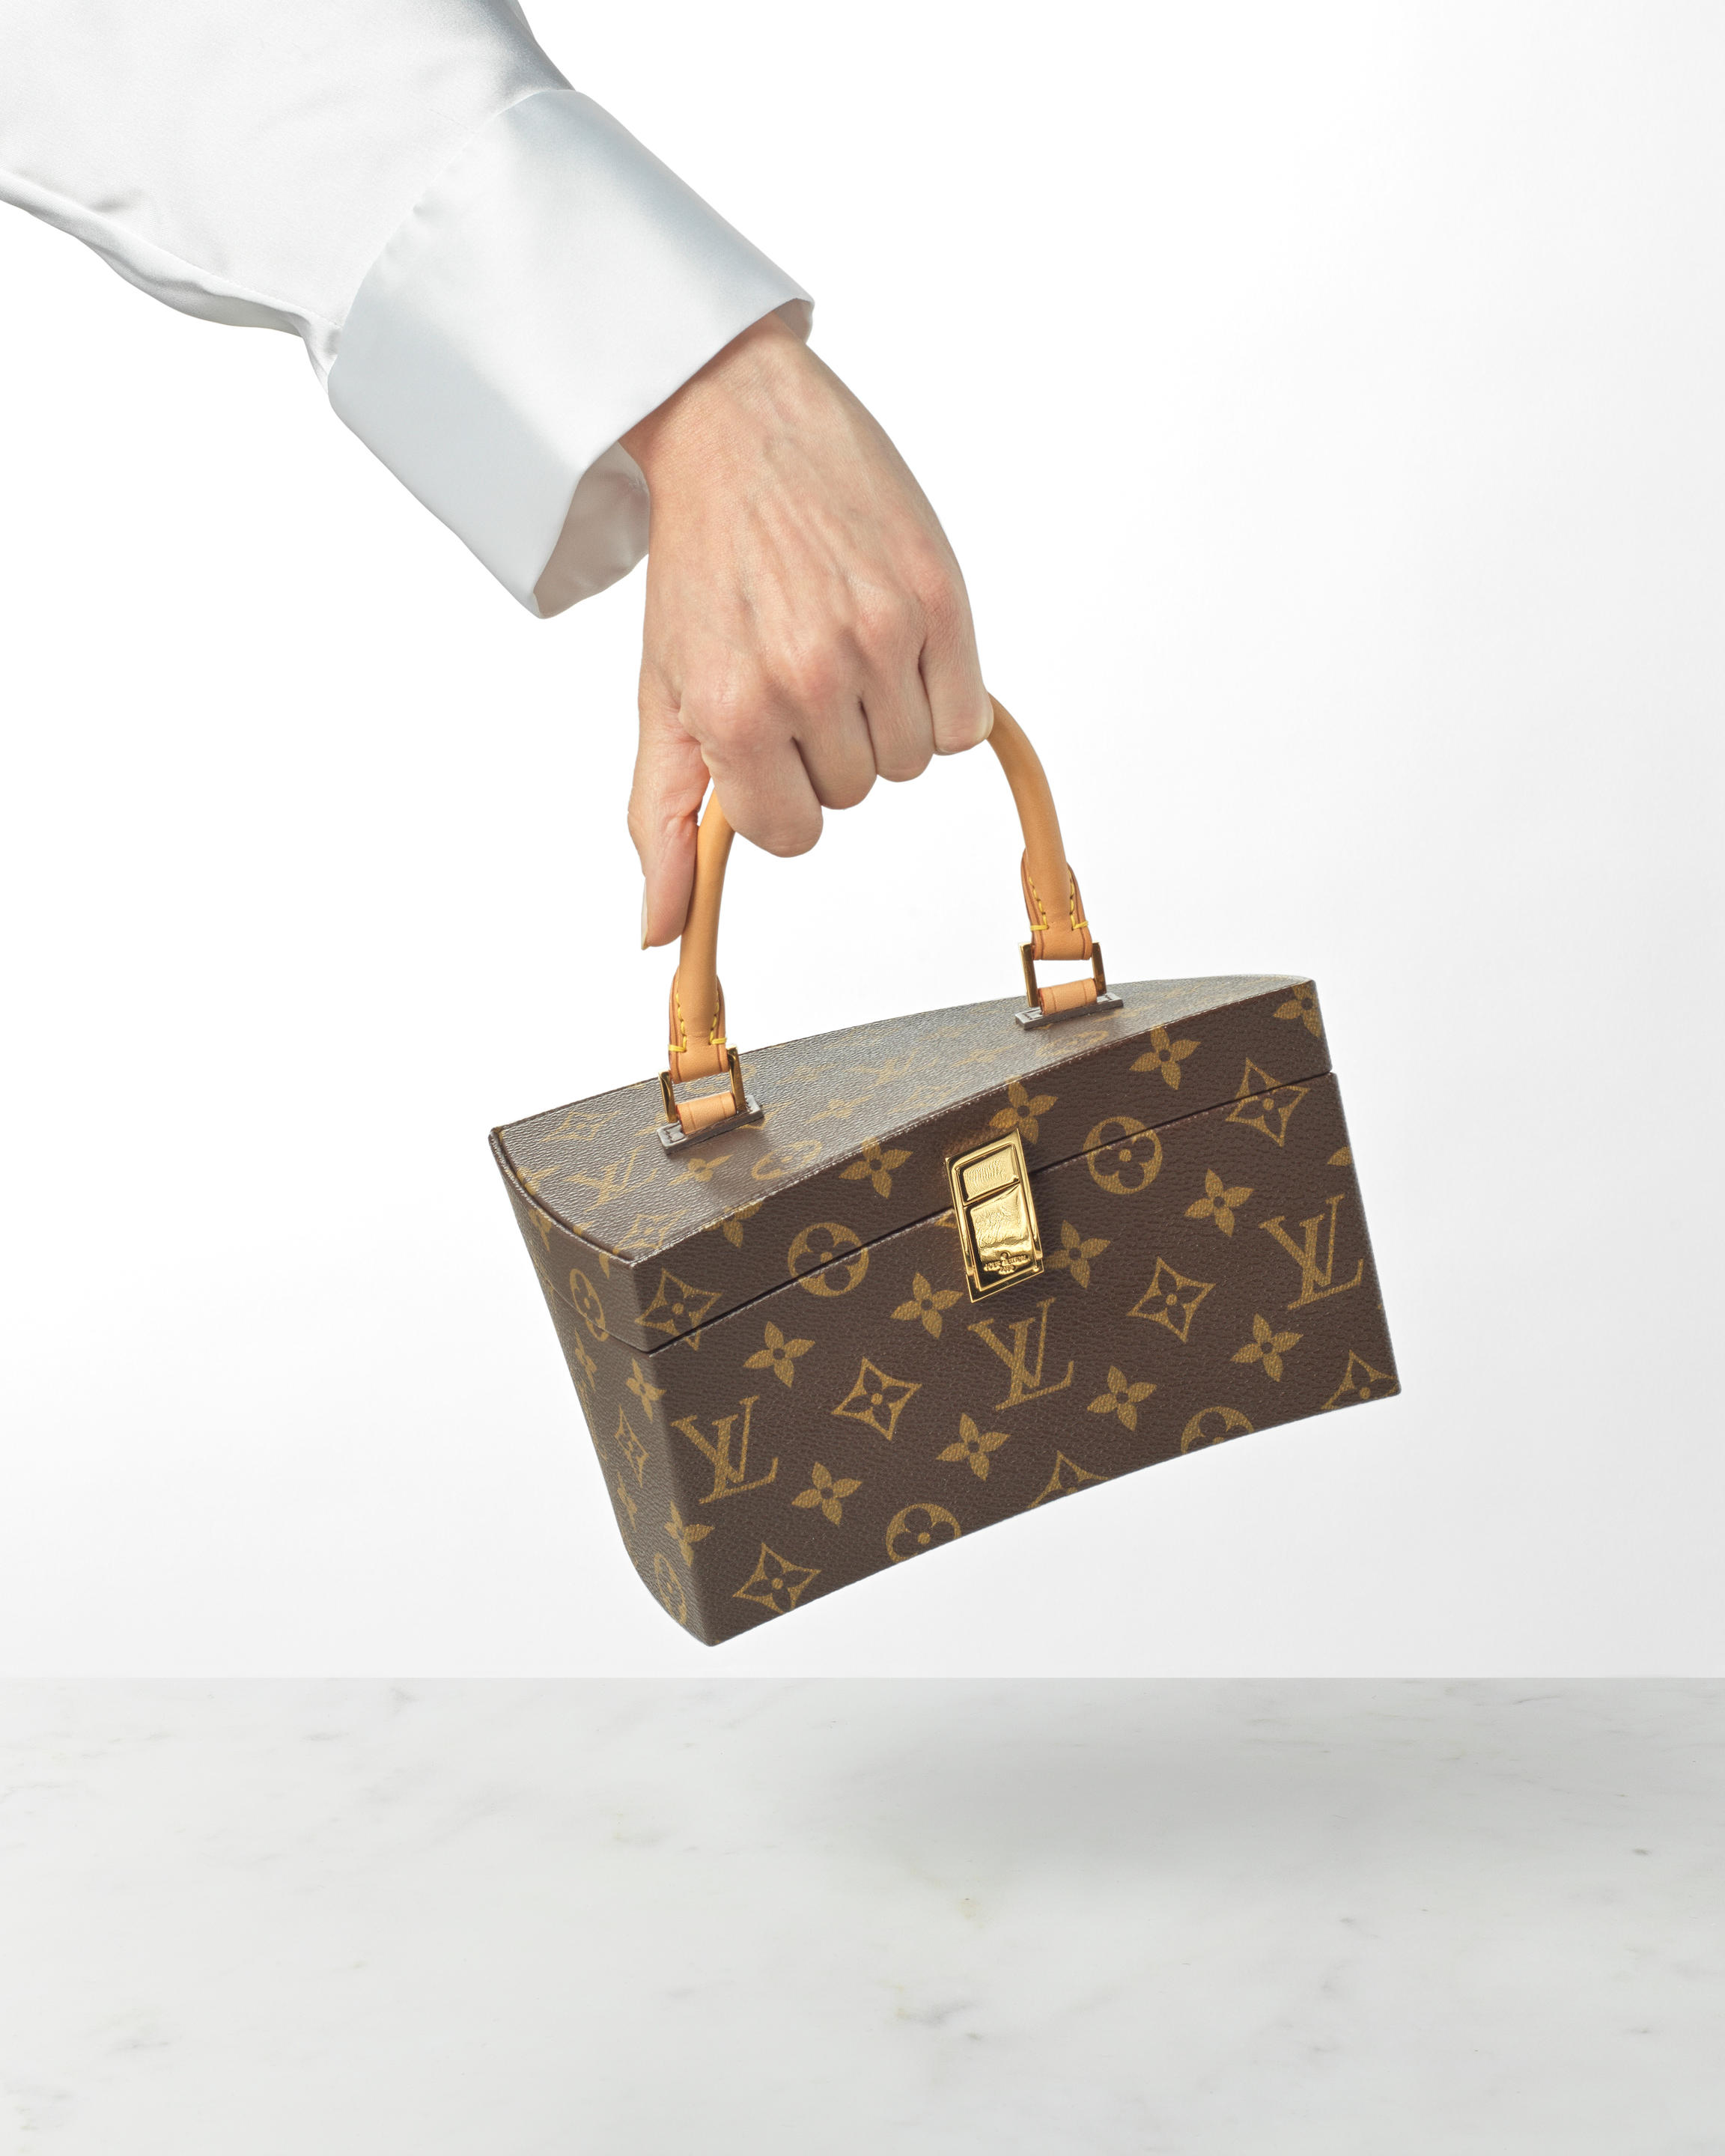 Bonhams : Louis Vuitton x Frank Gehry A Monogram Twisted Box Bag, 2014  Iconoclasts collection (includes shoulder strap, mirror, 'F.G' monogrammed  dust bag with luggage tag and booklets )